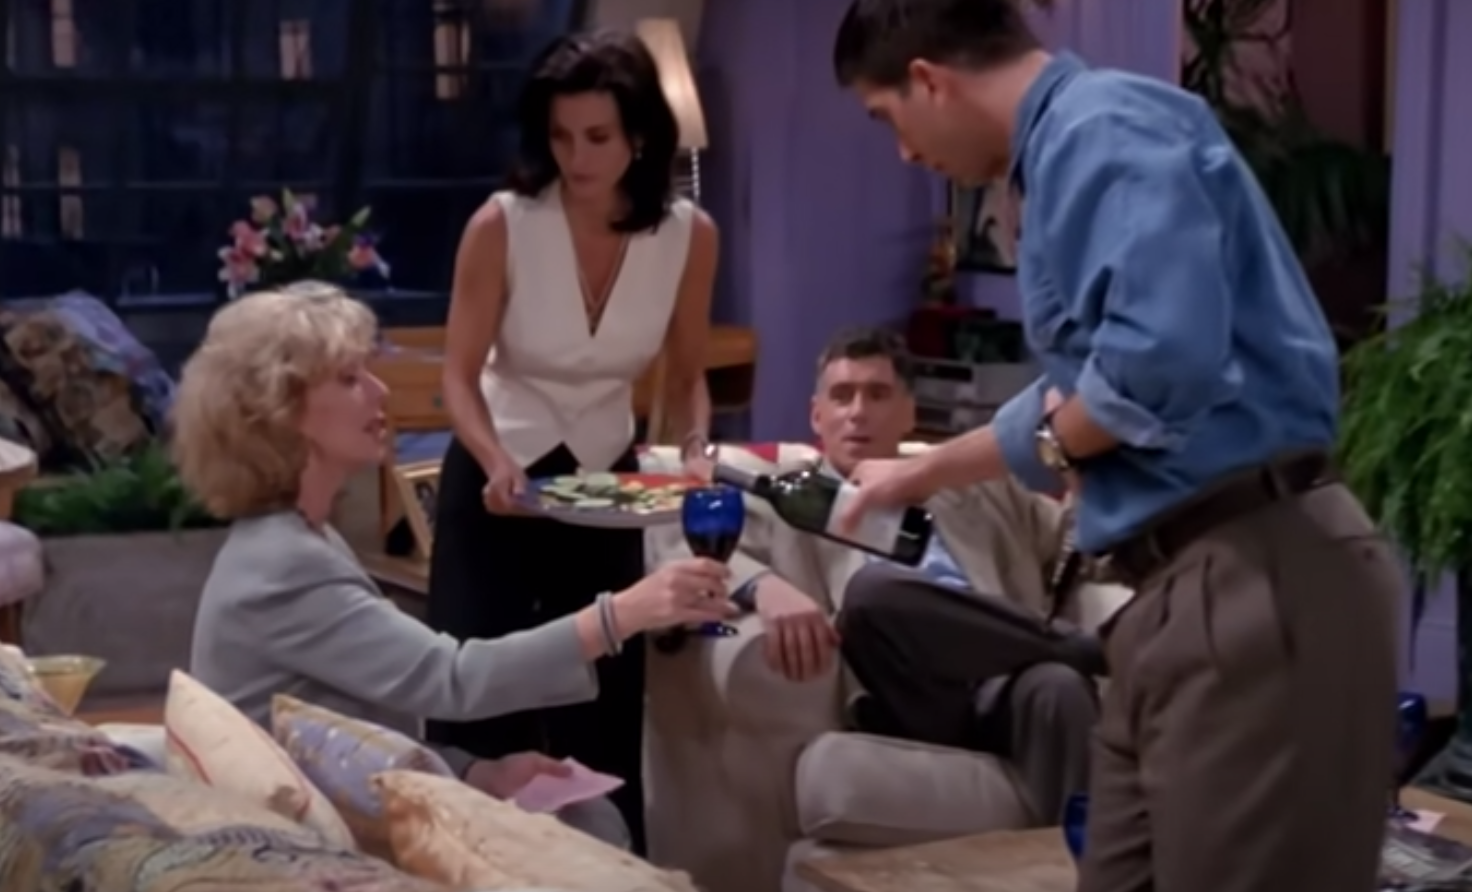 Monica and Ross serving their parents food and wine in &quot;Friends&quot;